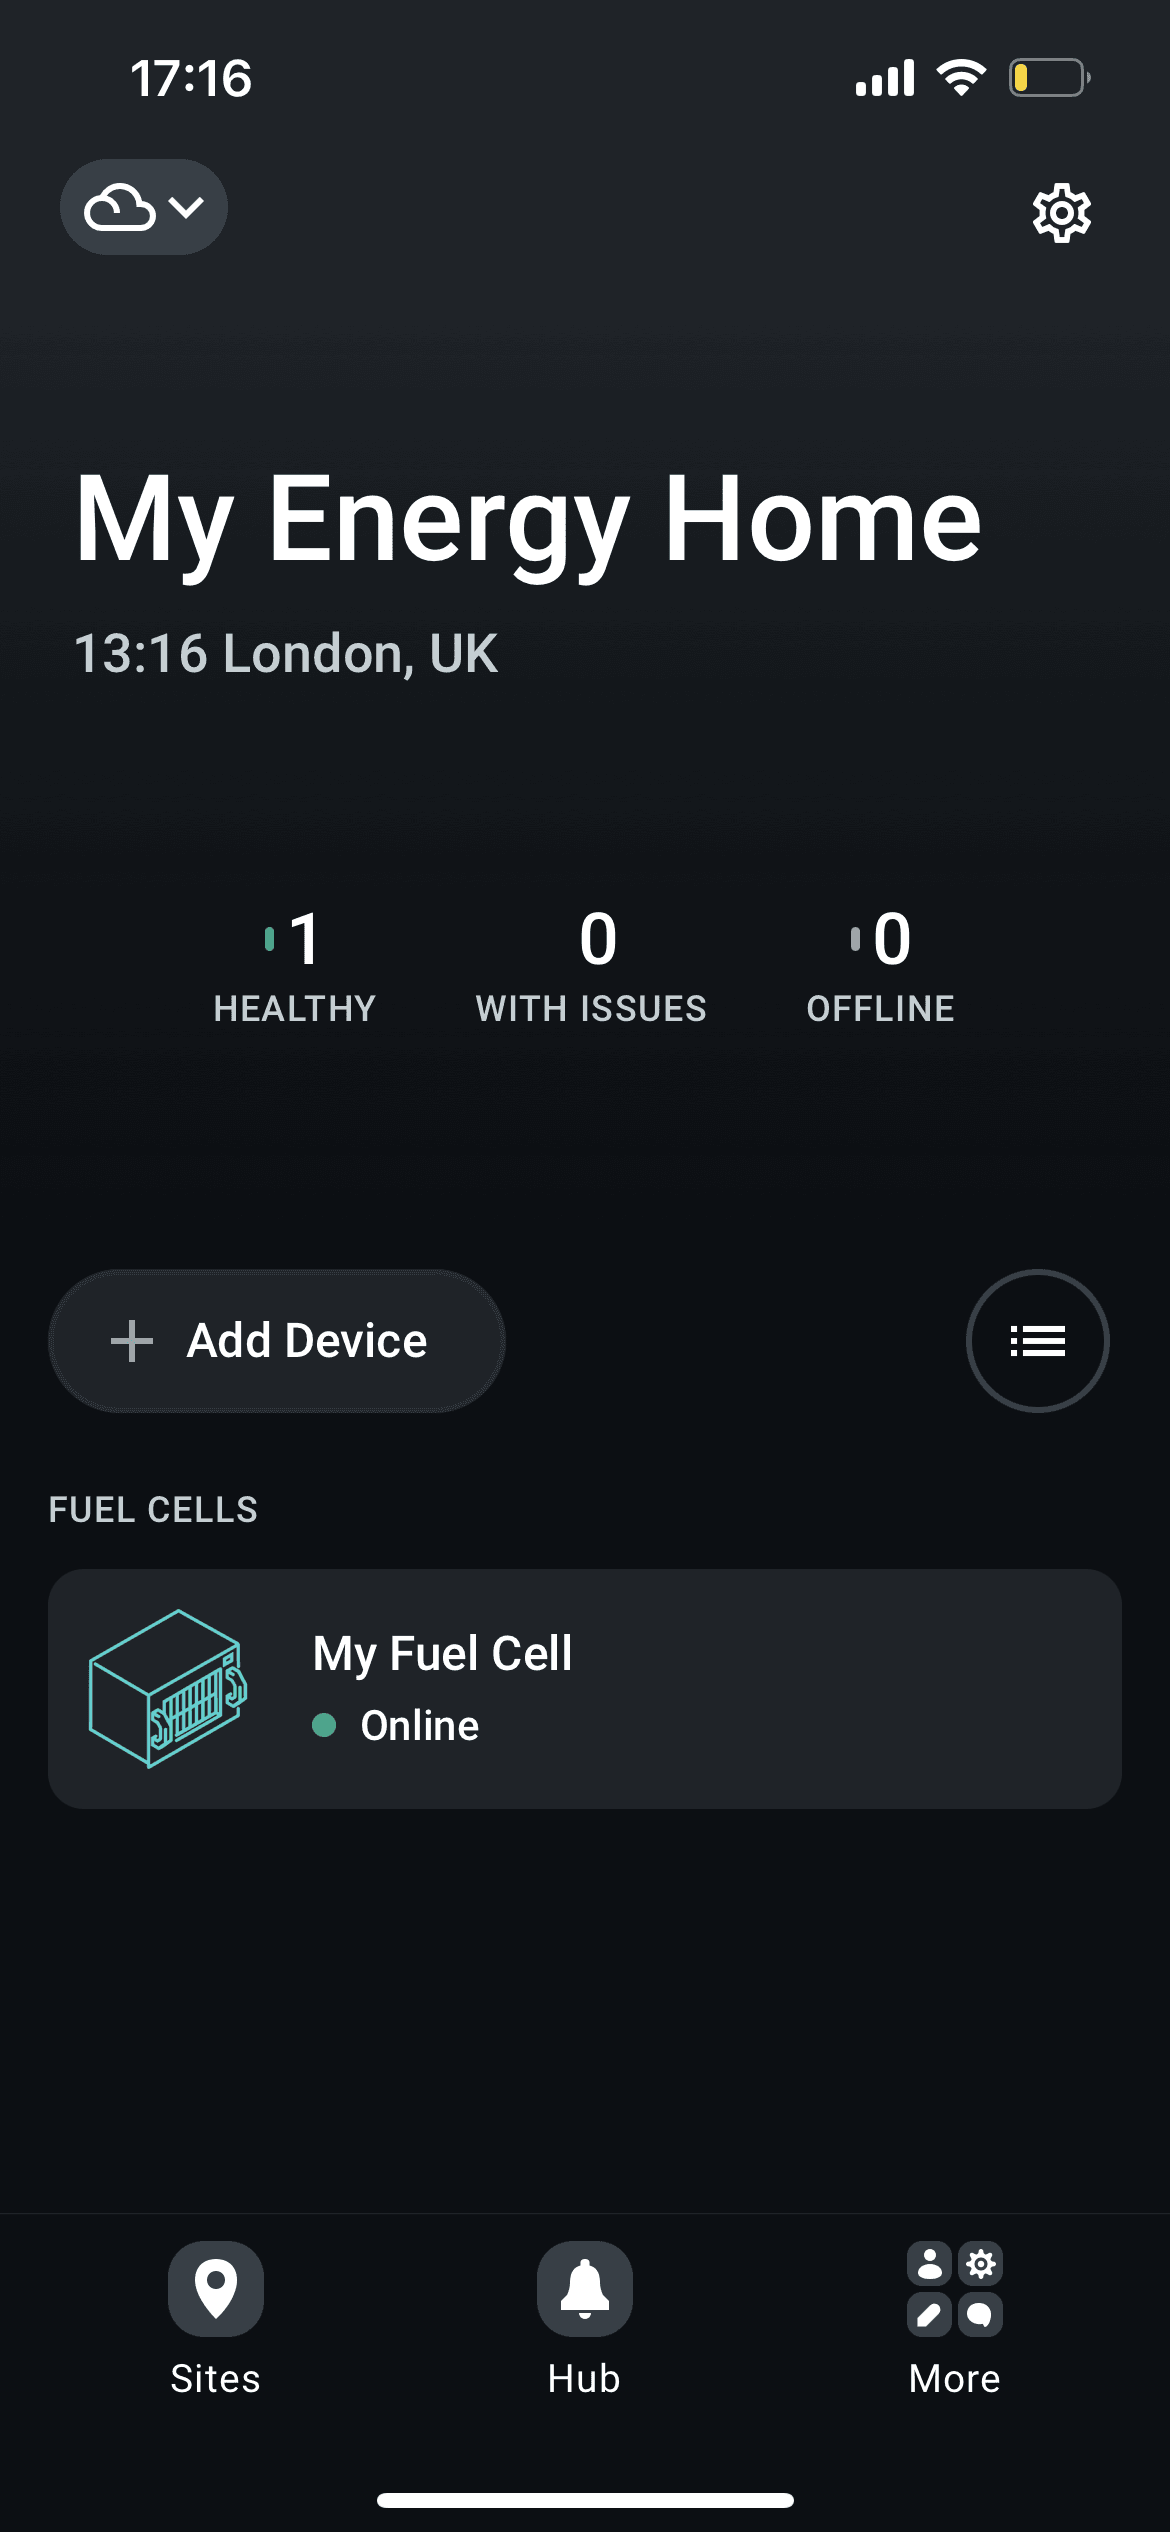 The fuel cell will appear on the device list on the site screen.